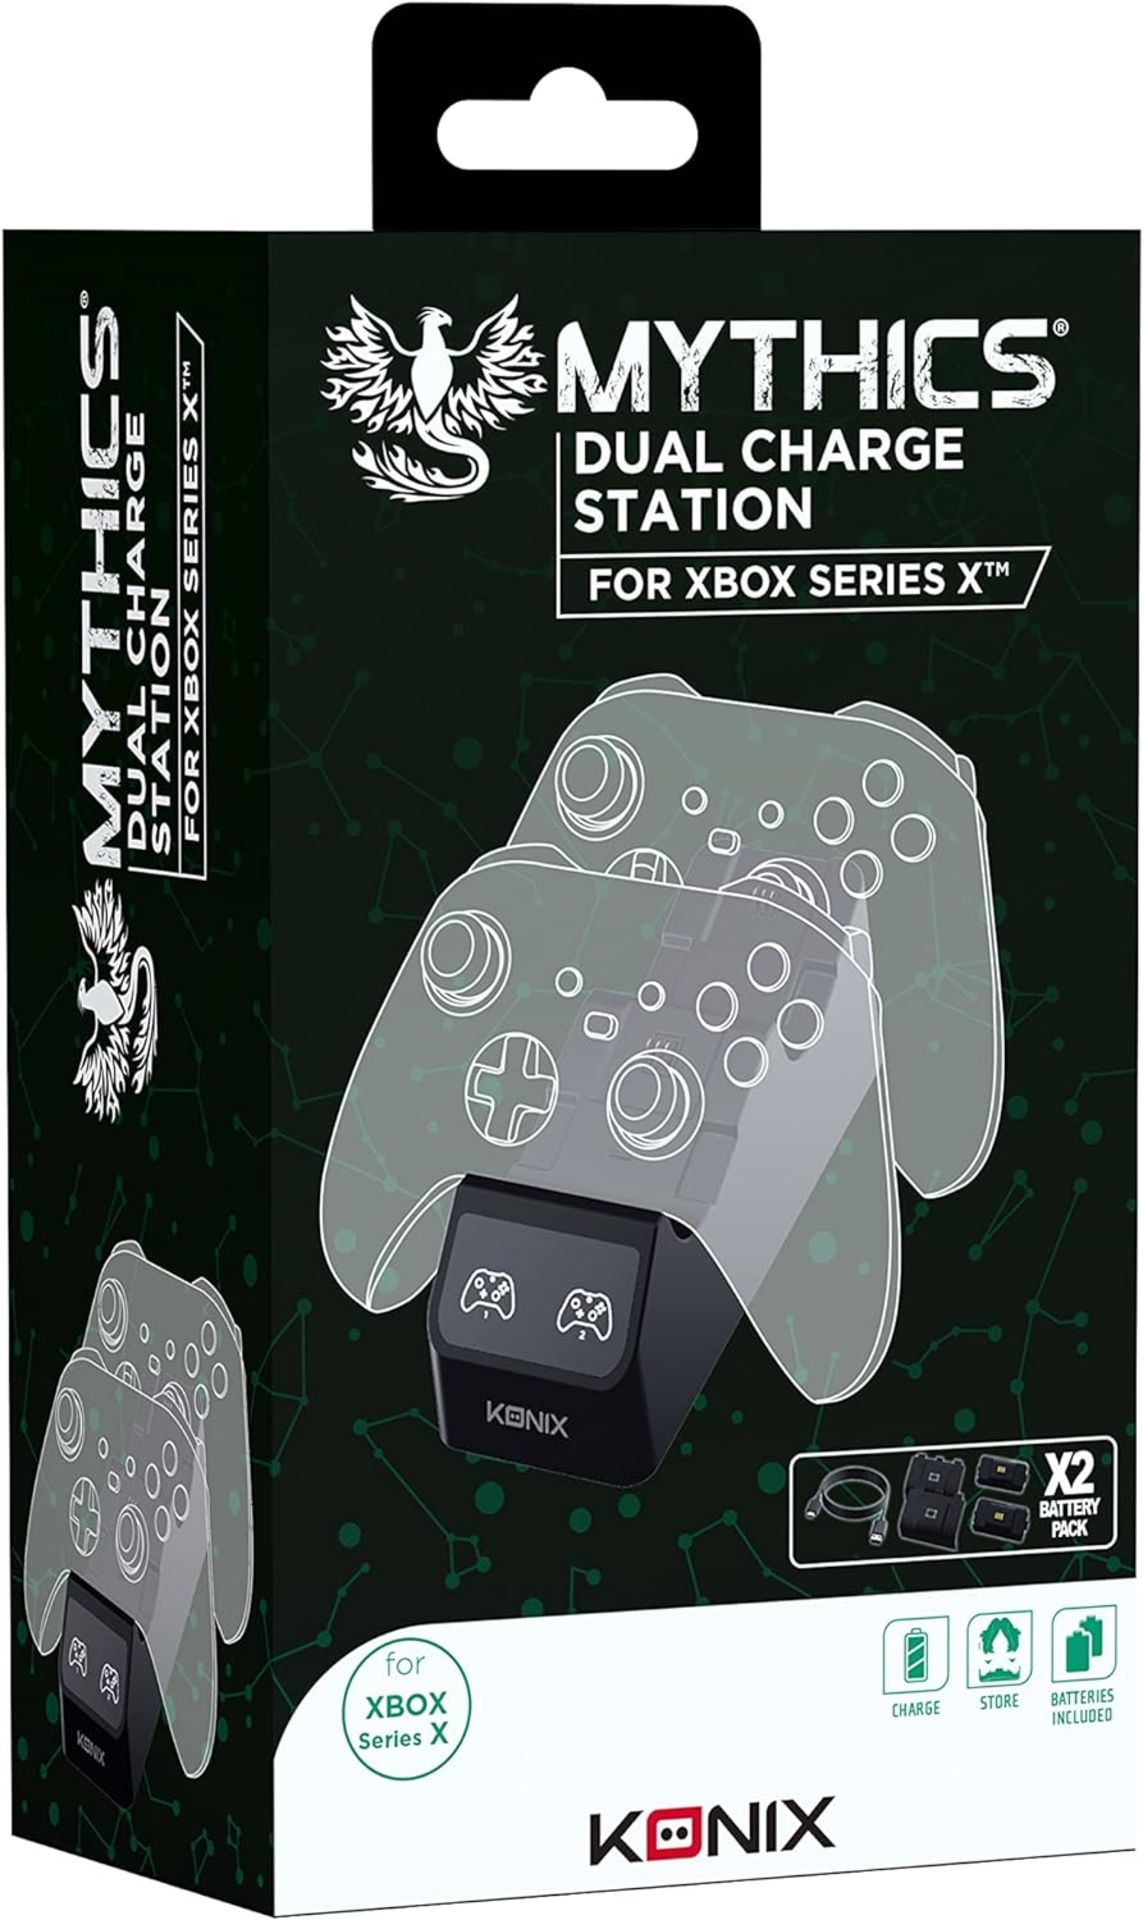 12x BRAND NEW KONIX MYTHICS DUAL CHARGE STATION FOR XBOX SERIES X CONTROLLERS. (R15-11)